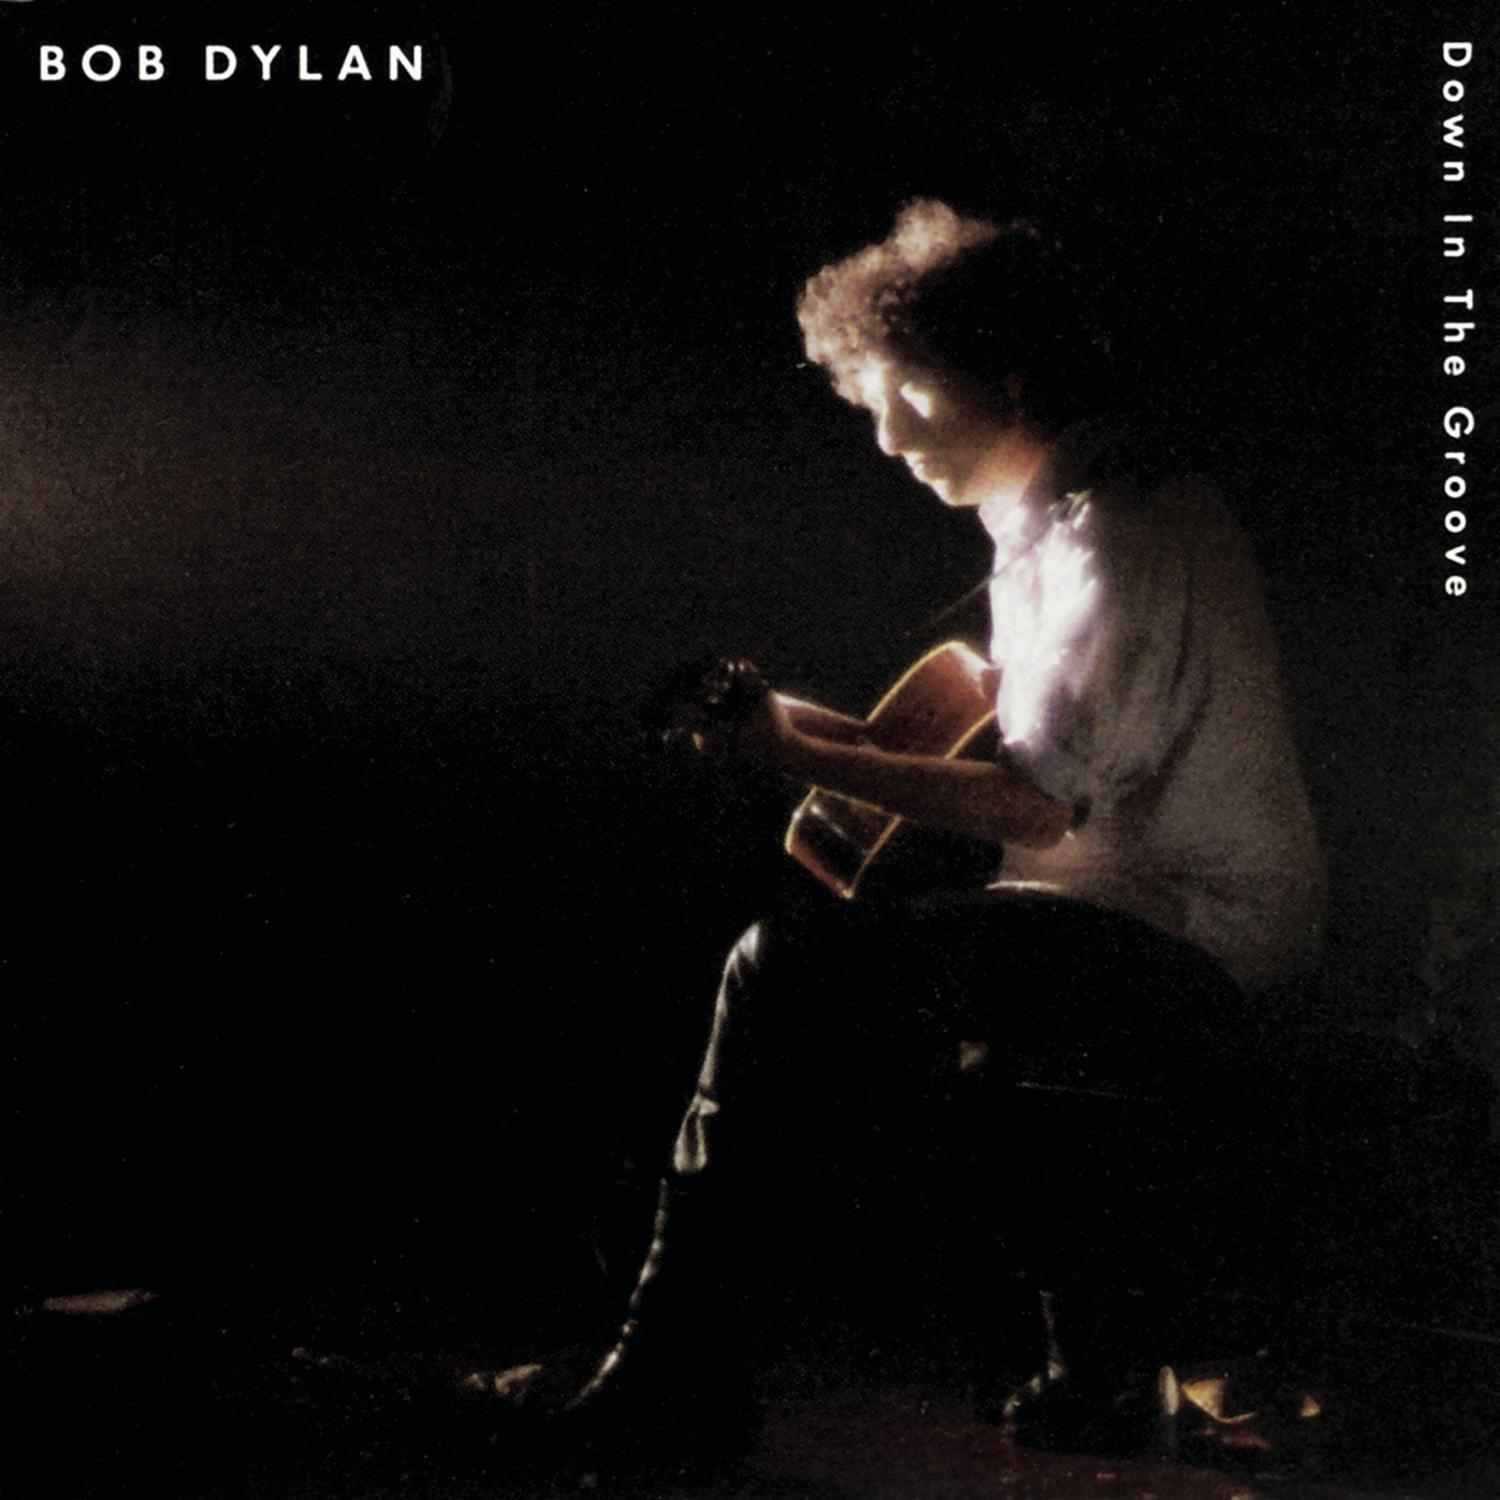 Bob Dylan - DOWN GROOVE THE IN (Vinyl) 